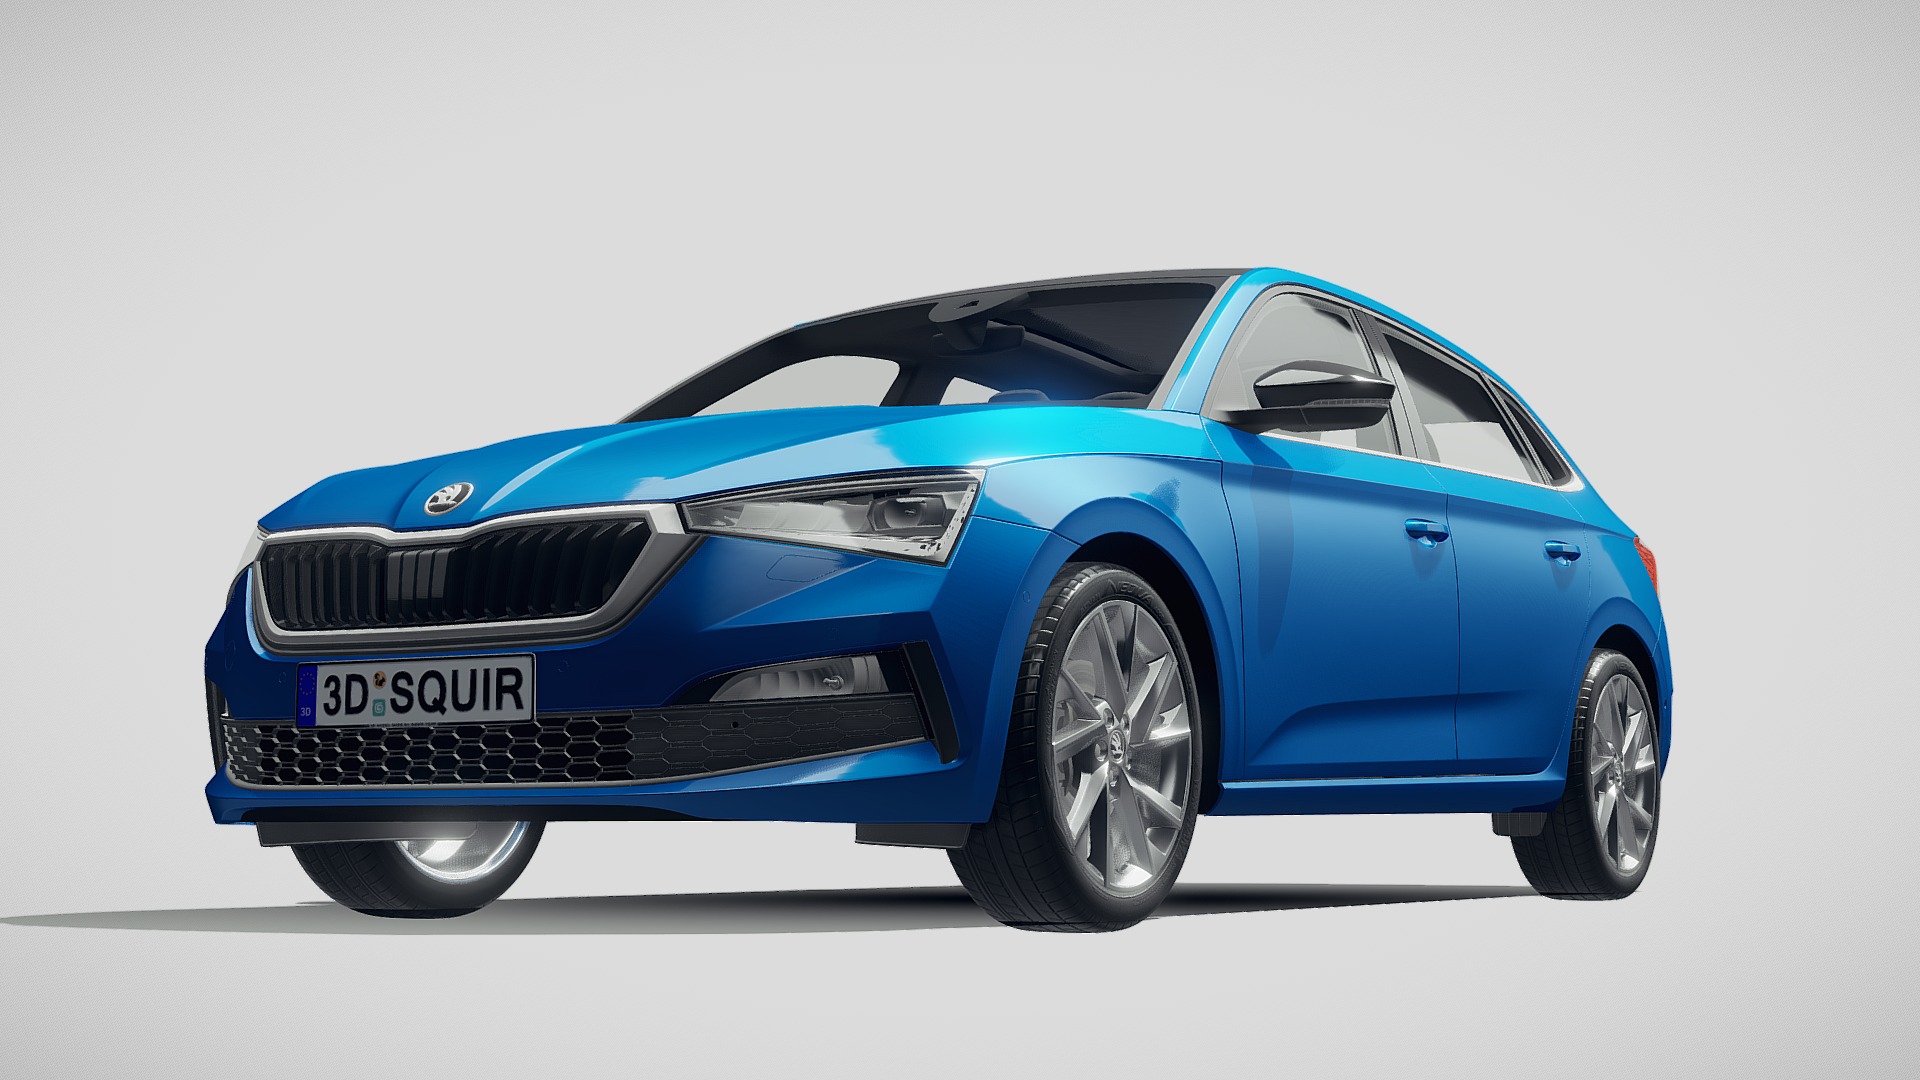 3D model Skoda Scala 2019 - This is a 3D model of the Skoda Scala 2019. The 3D model is about a blue car with a white background.